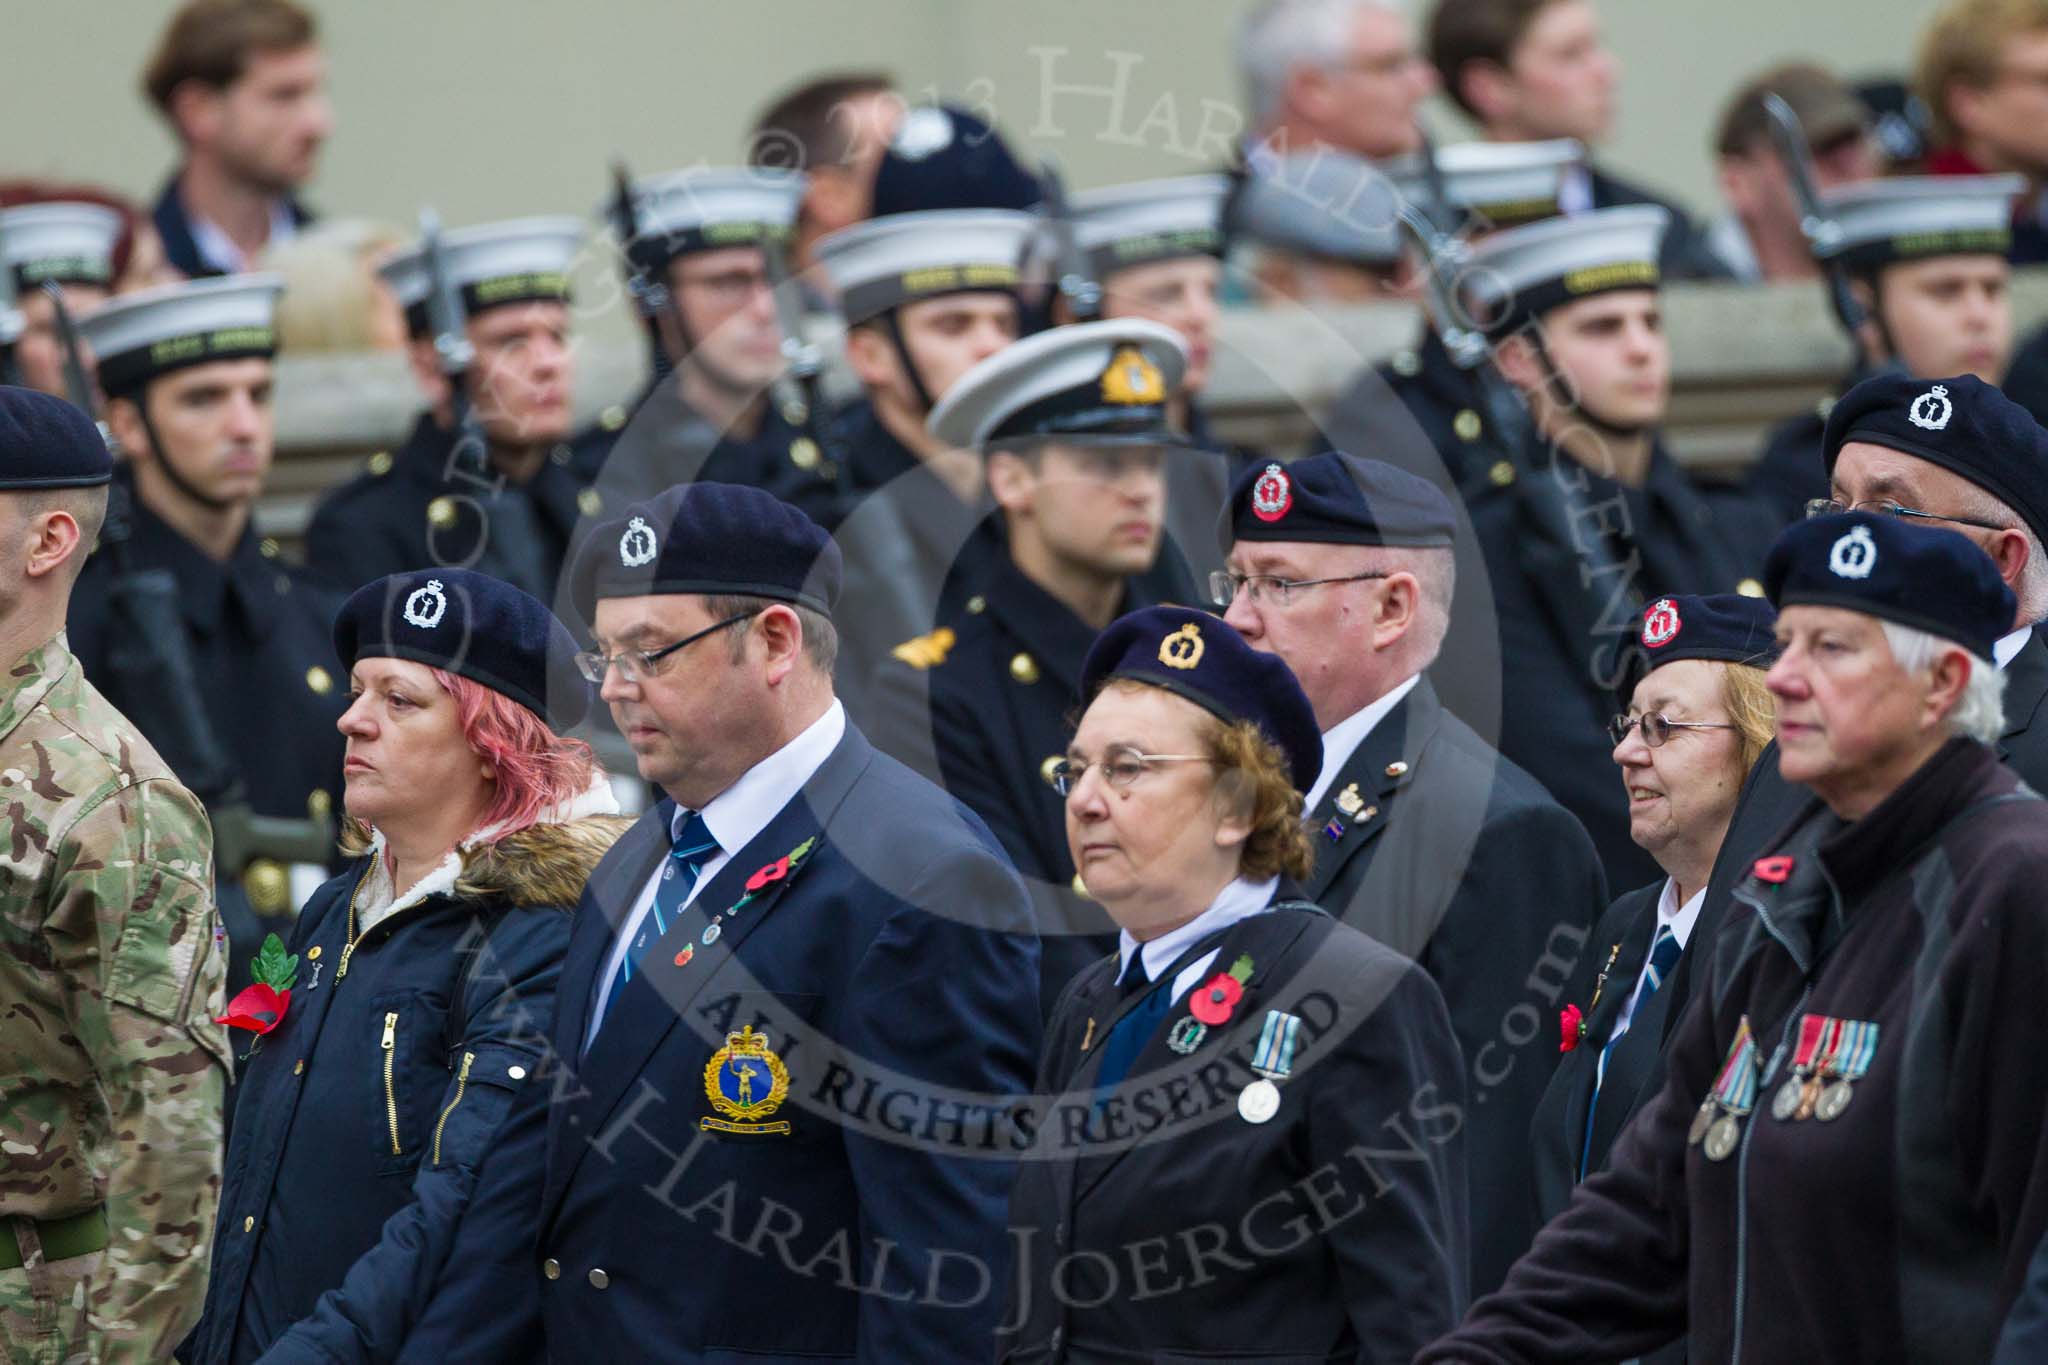 Remembrance Sunday at the Cenotaph 2015: Group C4, Royal Observer Corps Association (Anniversary).
Cenotaph, Whitehall, London SW1,
London,
Greater London,
United Kingdom,
on 08 November 2015 at 11:47, image #442